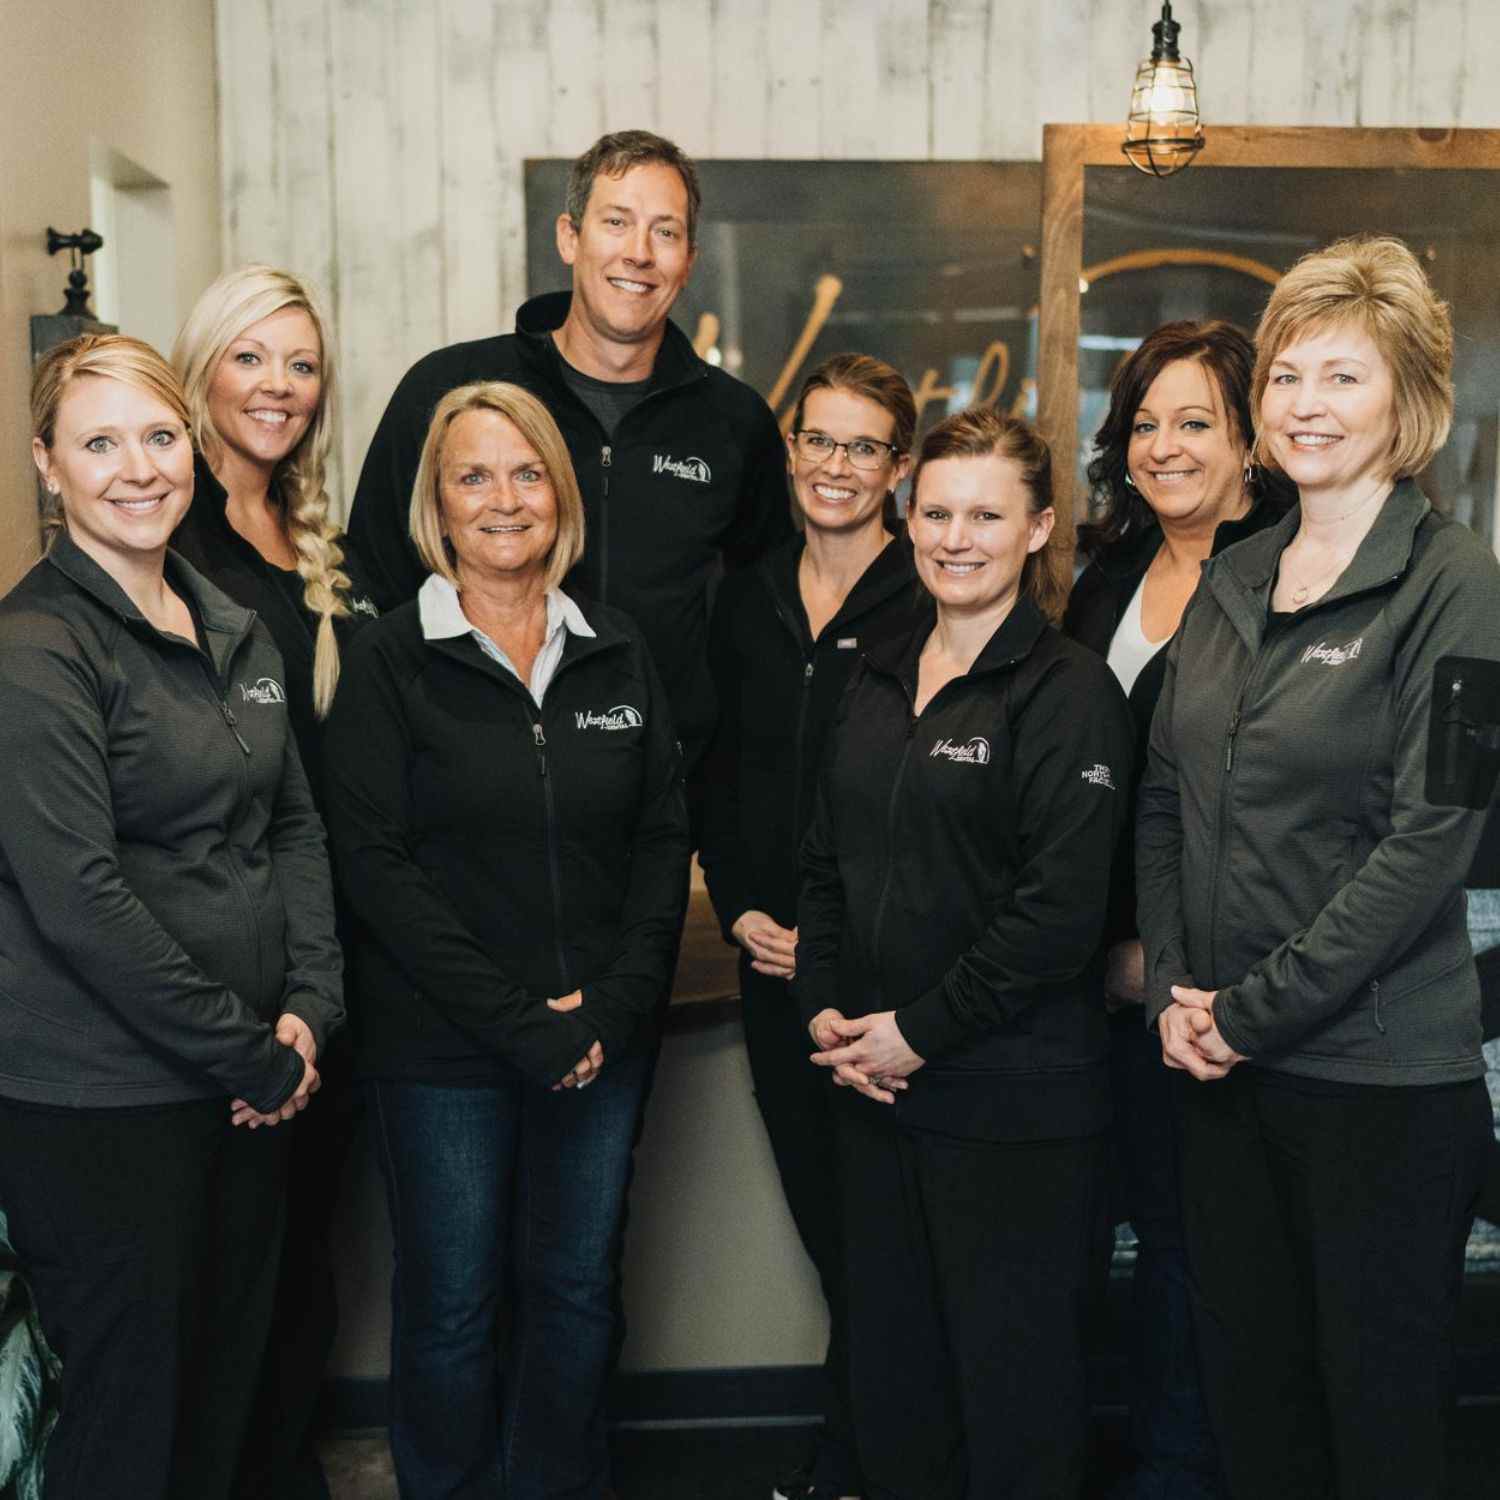 Our Team at Westfield Dental in Hector, MN